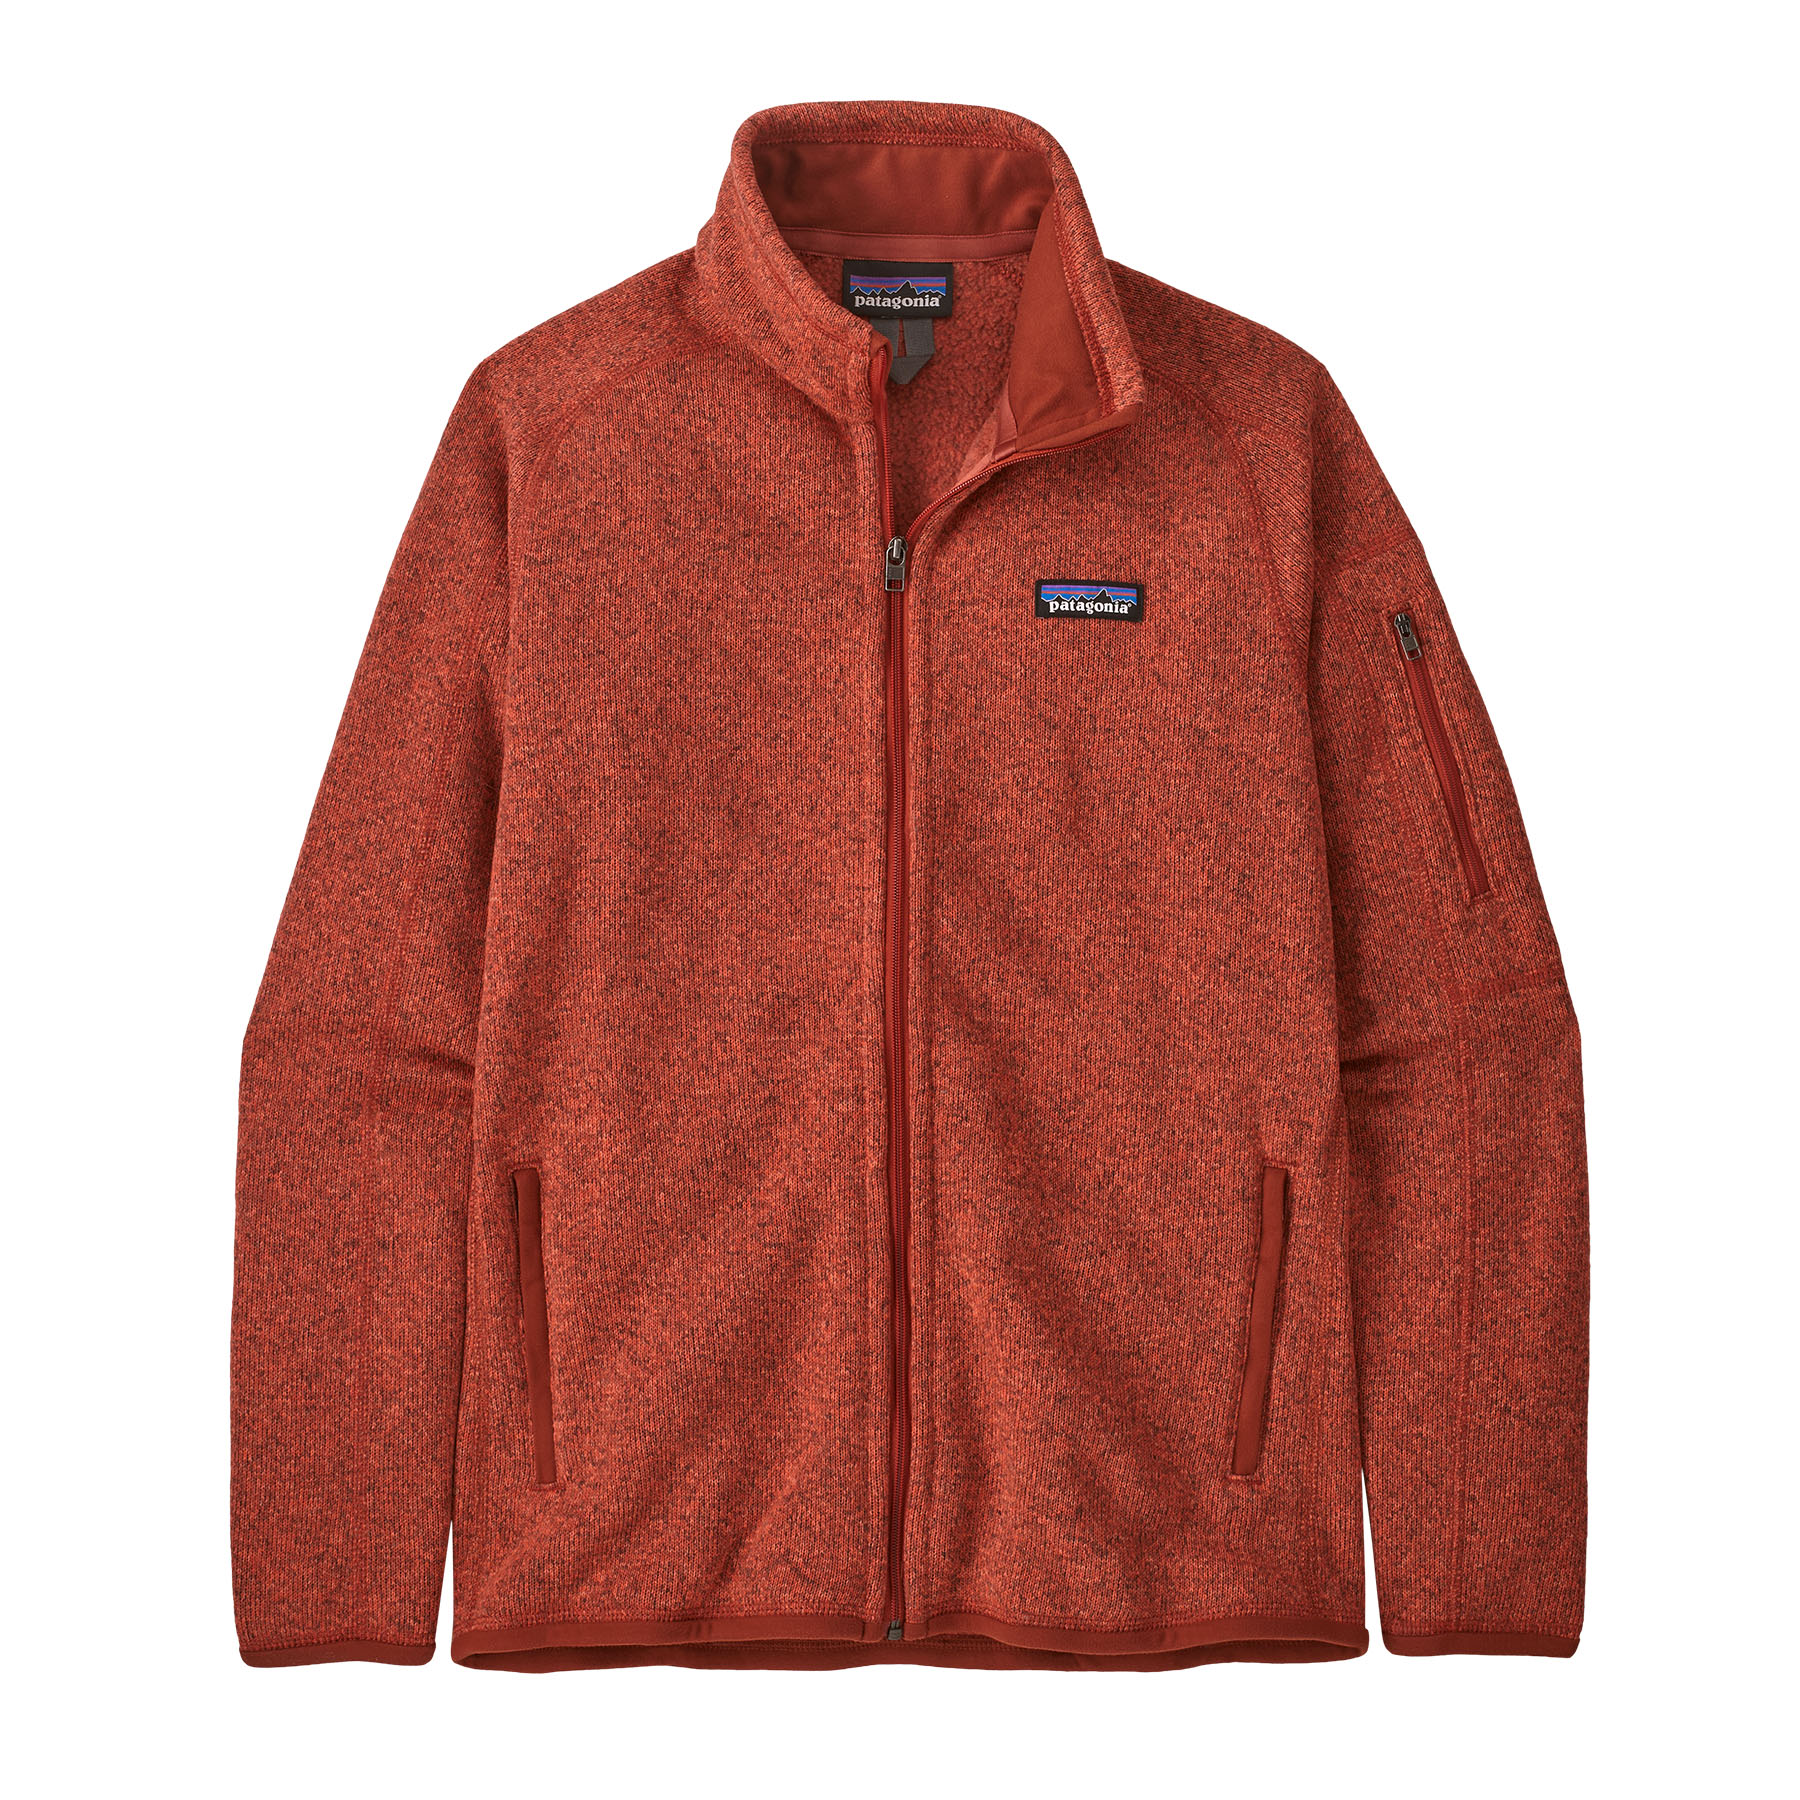 Patagonia Patagonia Women's Better Sweater Jacket Pimento Red XL, Pimento Red